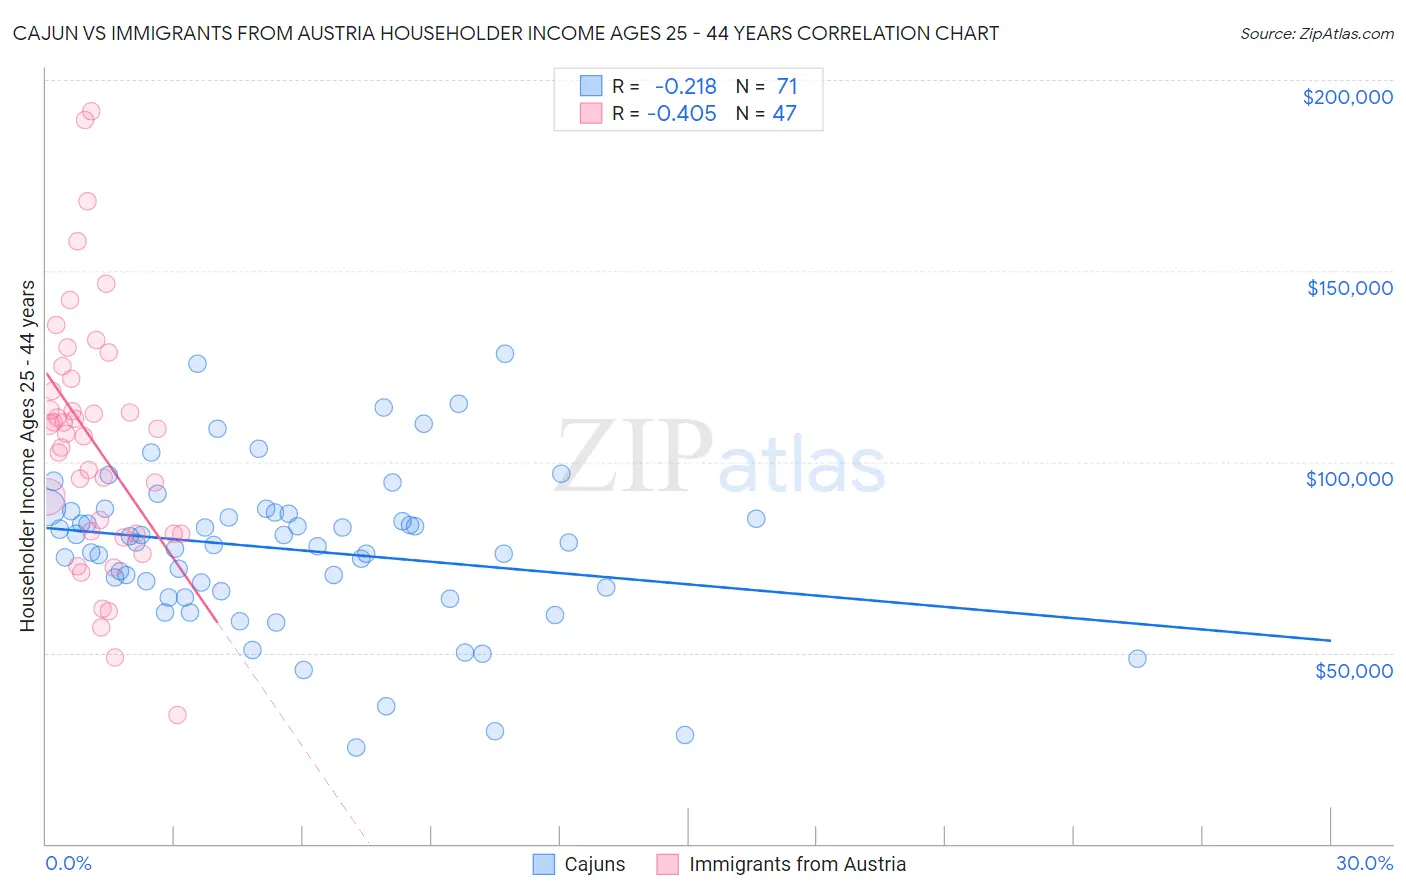 Cajun vs Immigrants from Austria Householder Income Ages 25 - 44 years